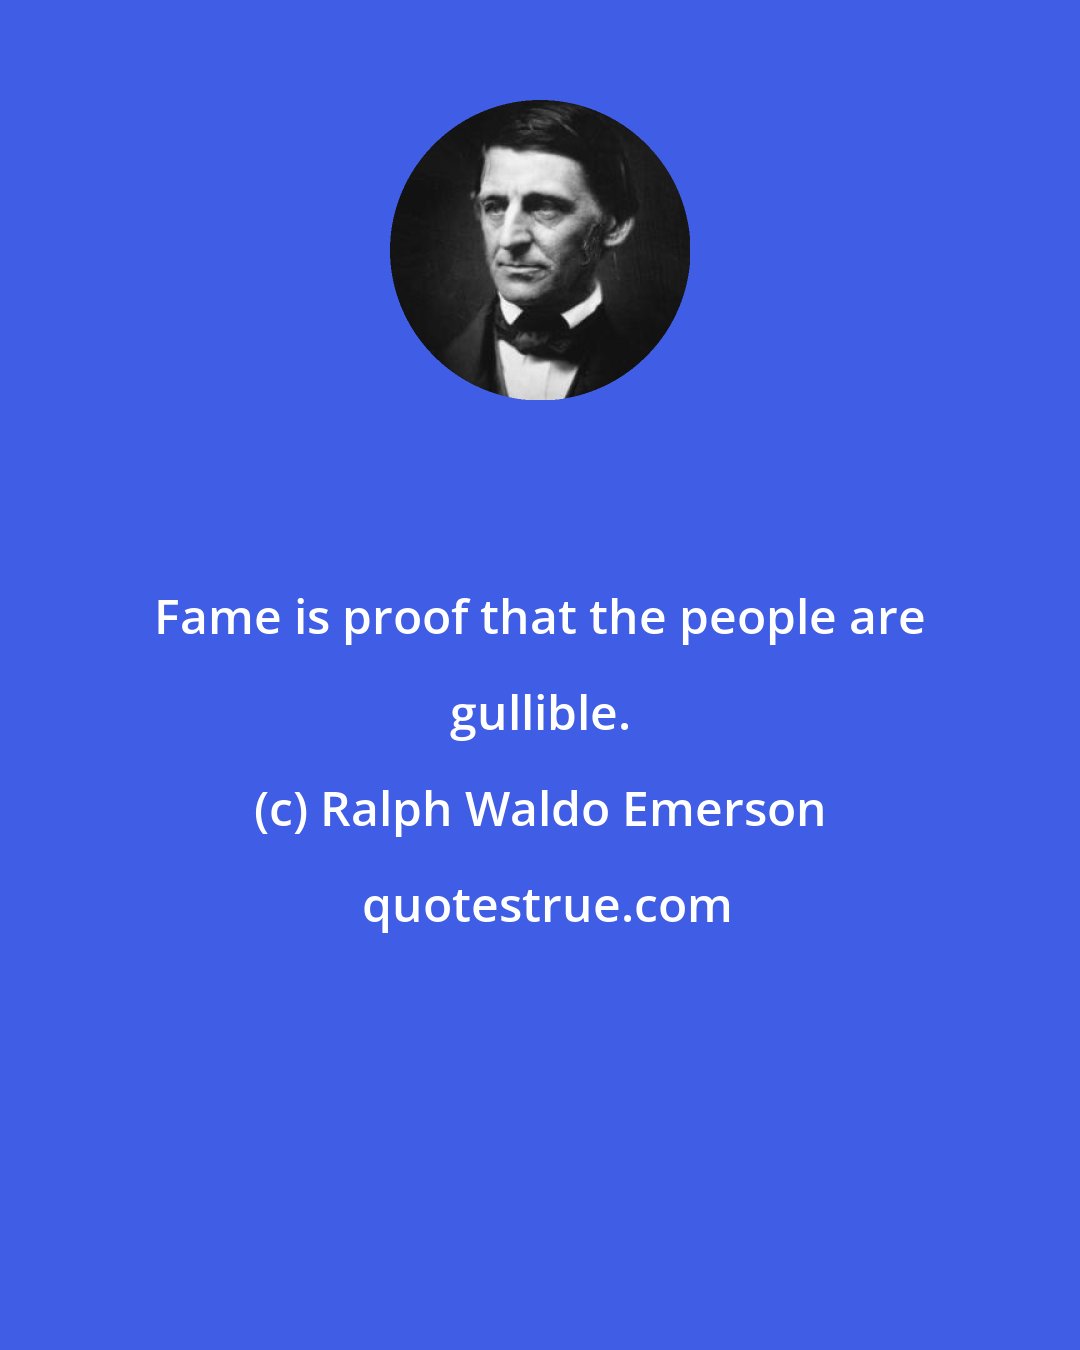 Ralph Waldo Emerson: Fame is proof that the people are gullible.